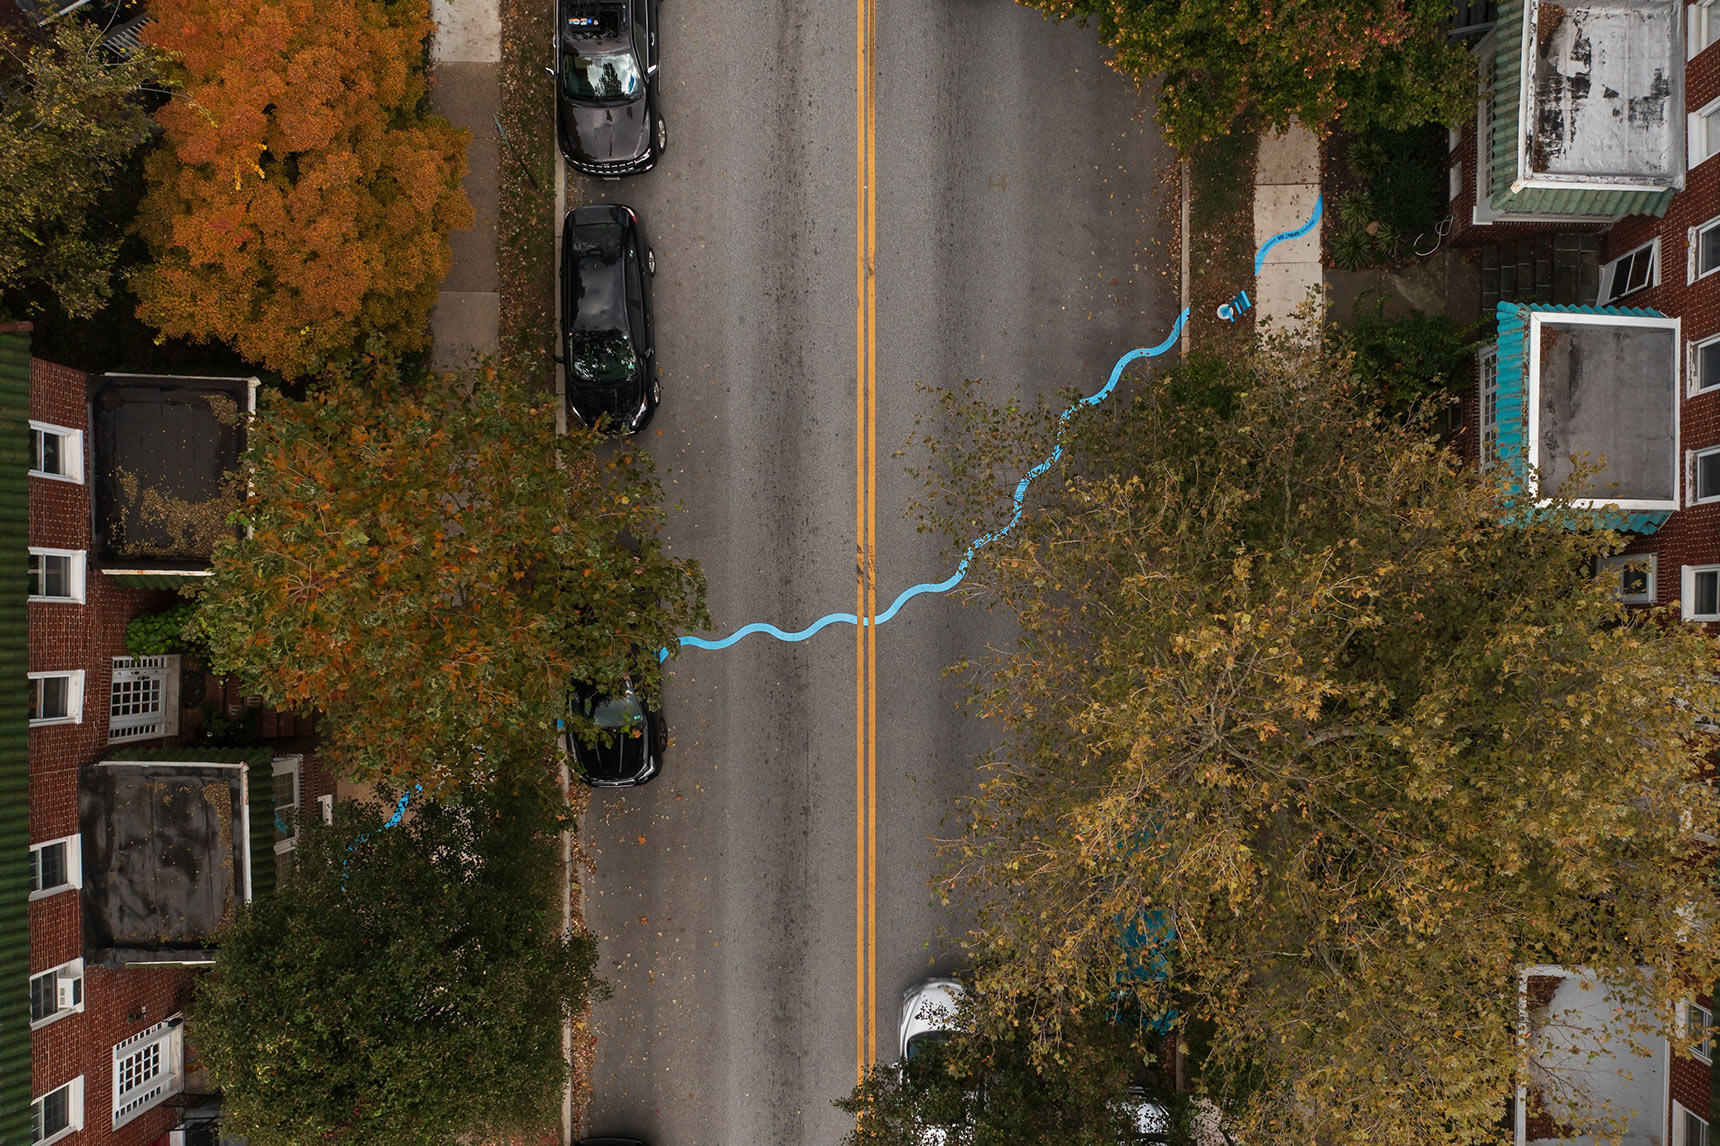 Aerial photo of a public art installation mapping the path of an underground stream. A bright blue wavy line snakes all the way across a roadway and sidewalks between two blocks of Baltimore rowhouses. The blue line appears to duck below yellow road markings and the grass strips at the edge of the street. Yellow and orange trees show fall colors.